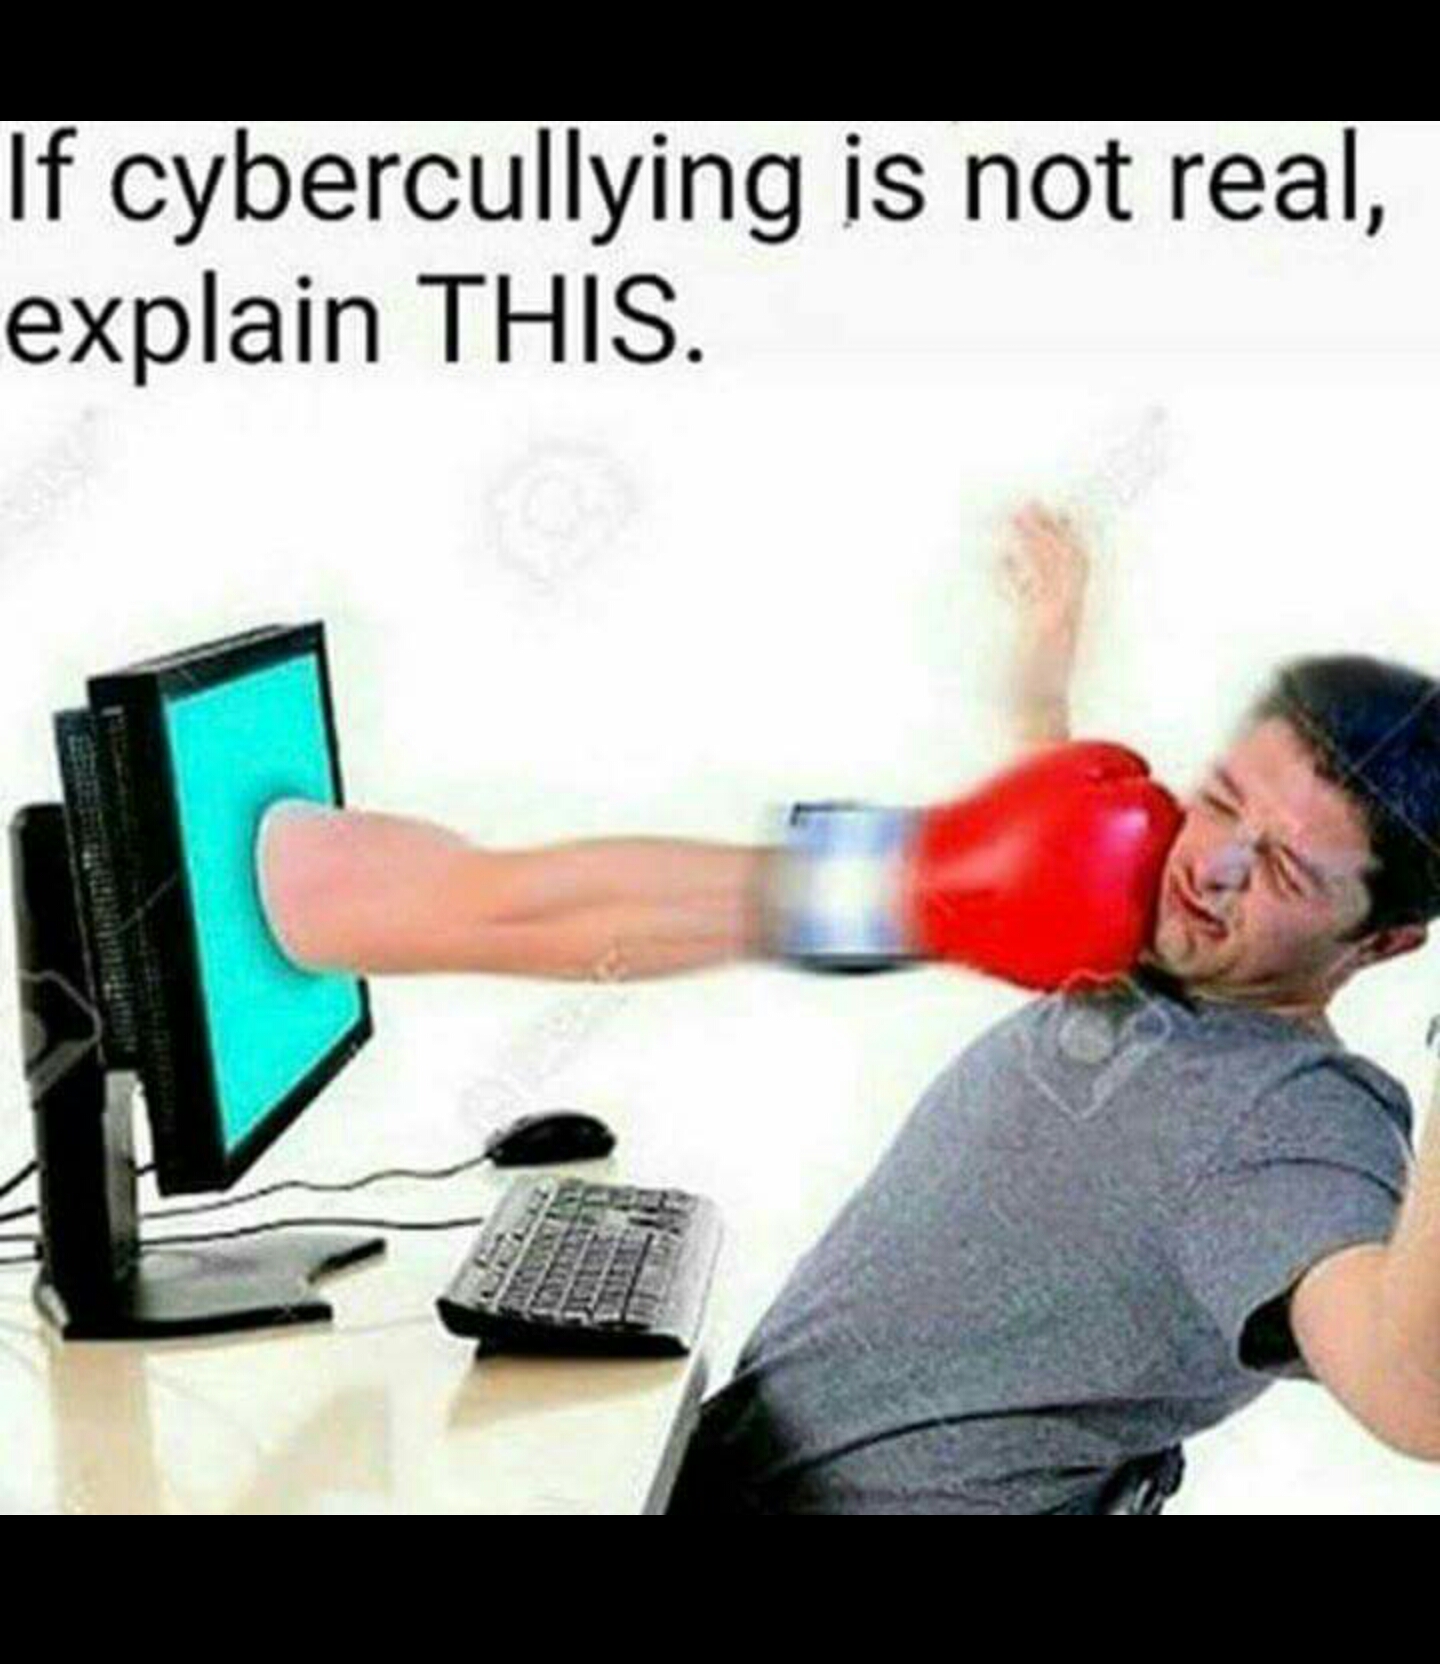 internet criticism - If cybercullying is not real, explain This.